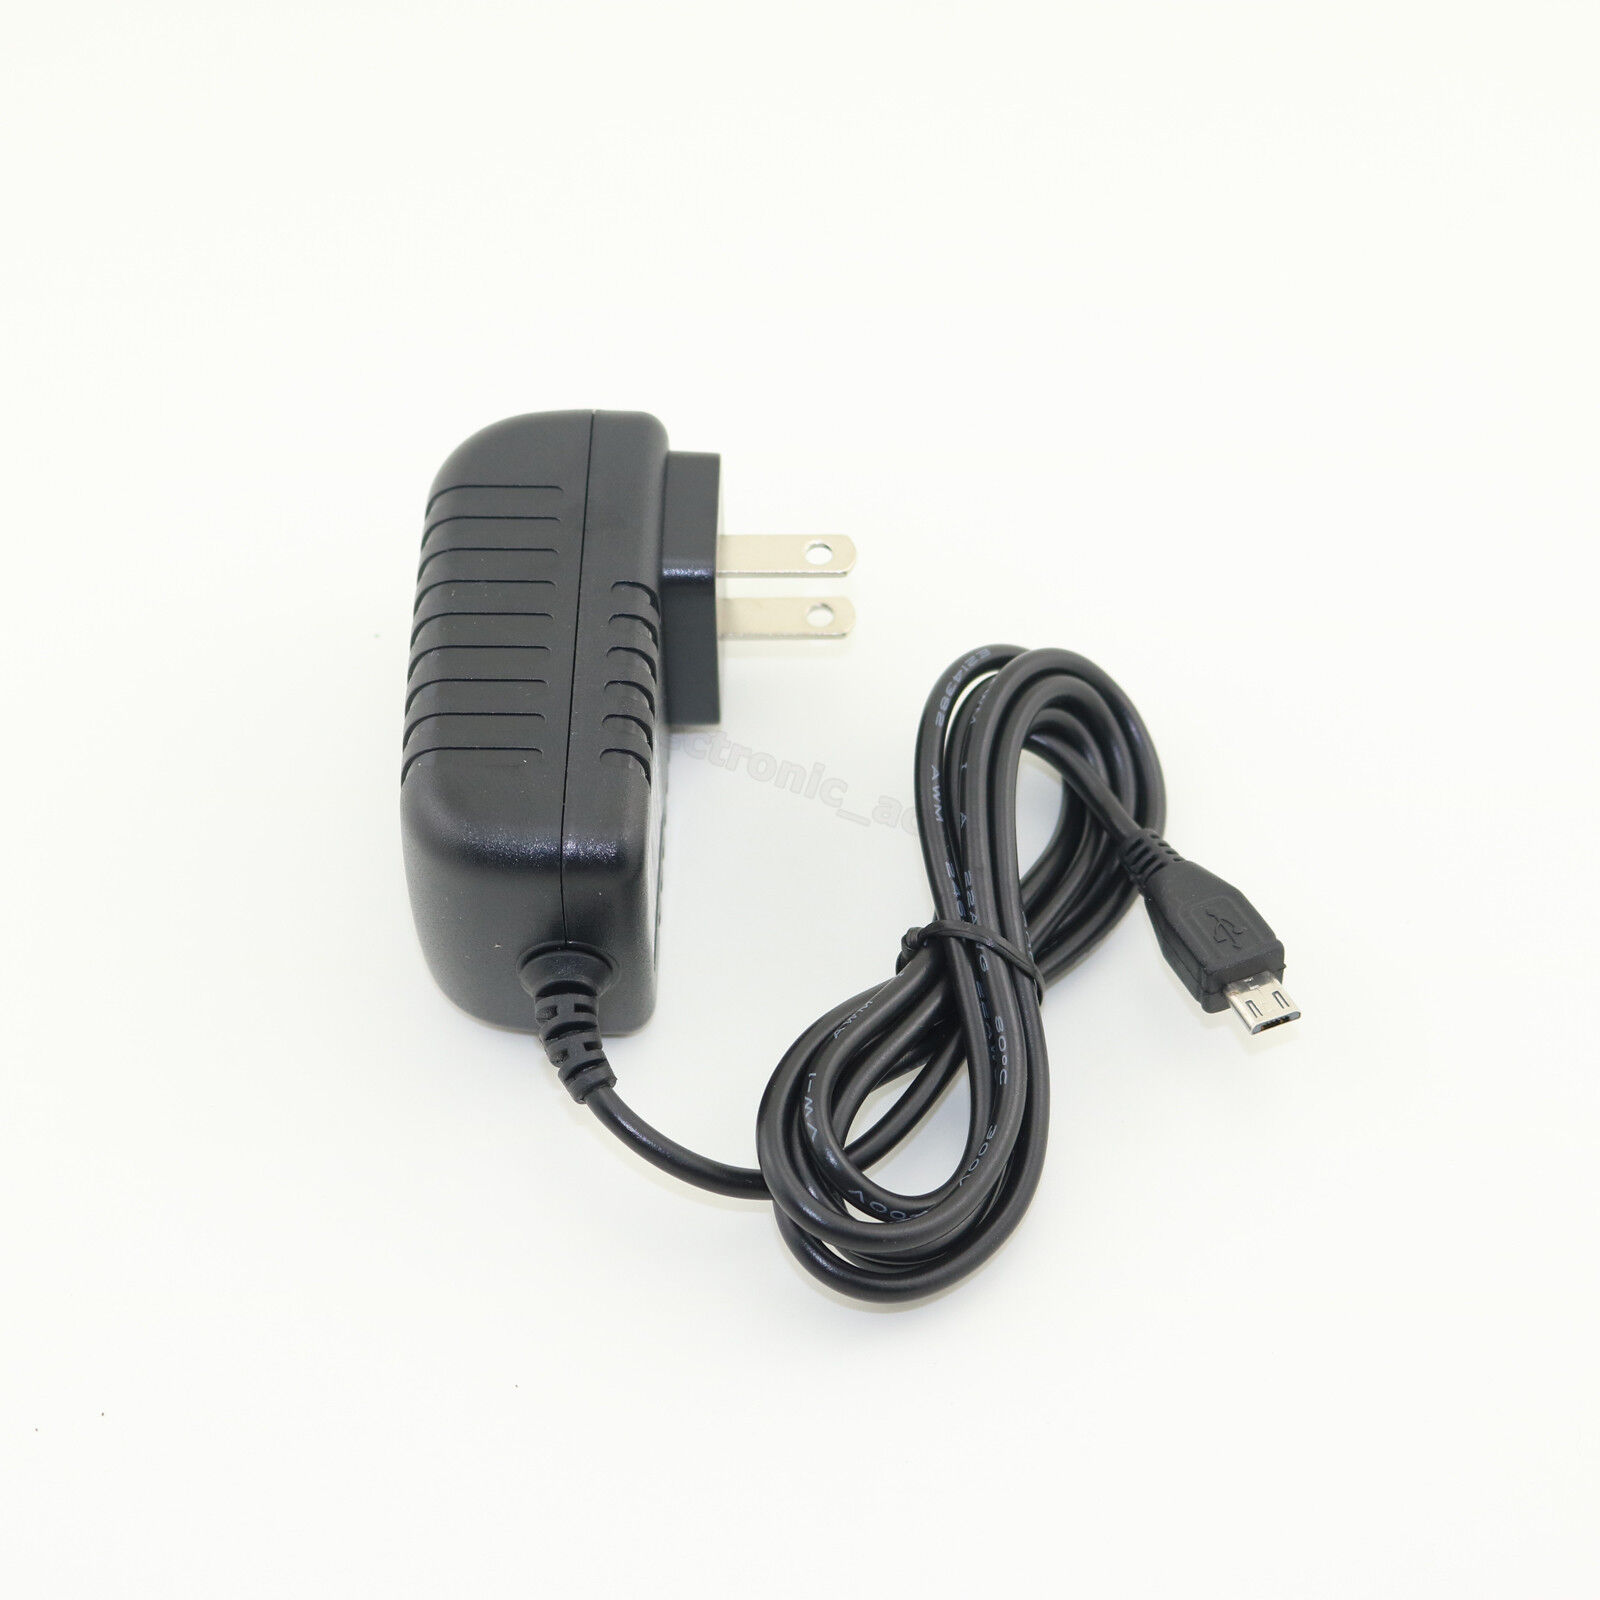 AC Adapter for Dymo LabelManager 500TS 1790417 155 160 210D 220P 350 LM-160 Construction: 100% Brand New! Generic Repla